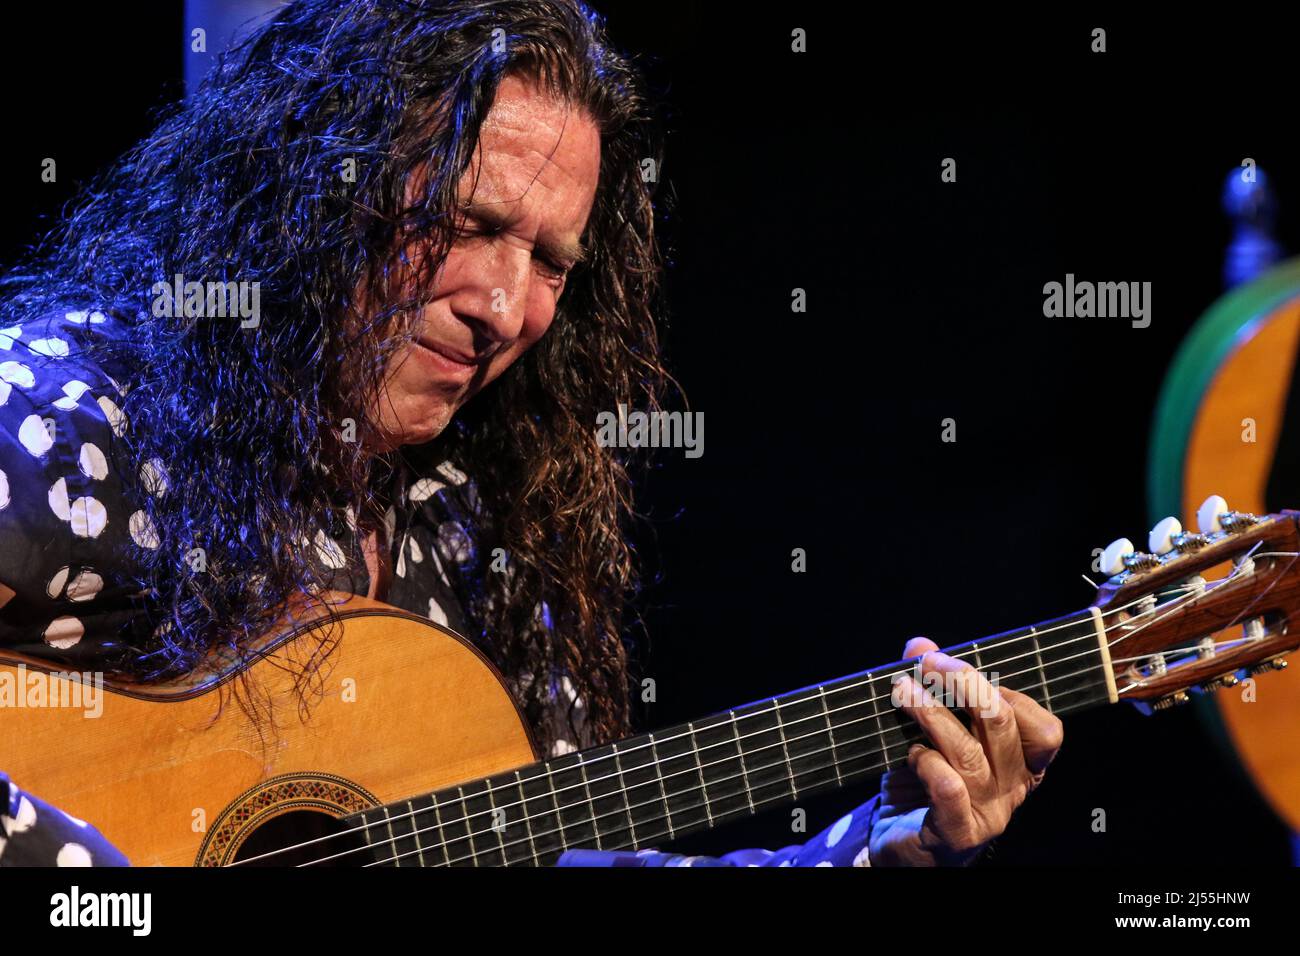 April 19, 2022: 20 April 2022 (Malaga) Guitarist Tomatito with the  spectacle Sexteto, at the Cervantes Theatre in Malaga, which has become a  soloist of maximum relevance in the field of flamenco